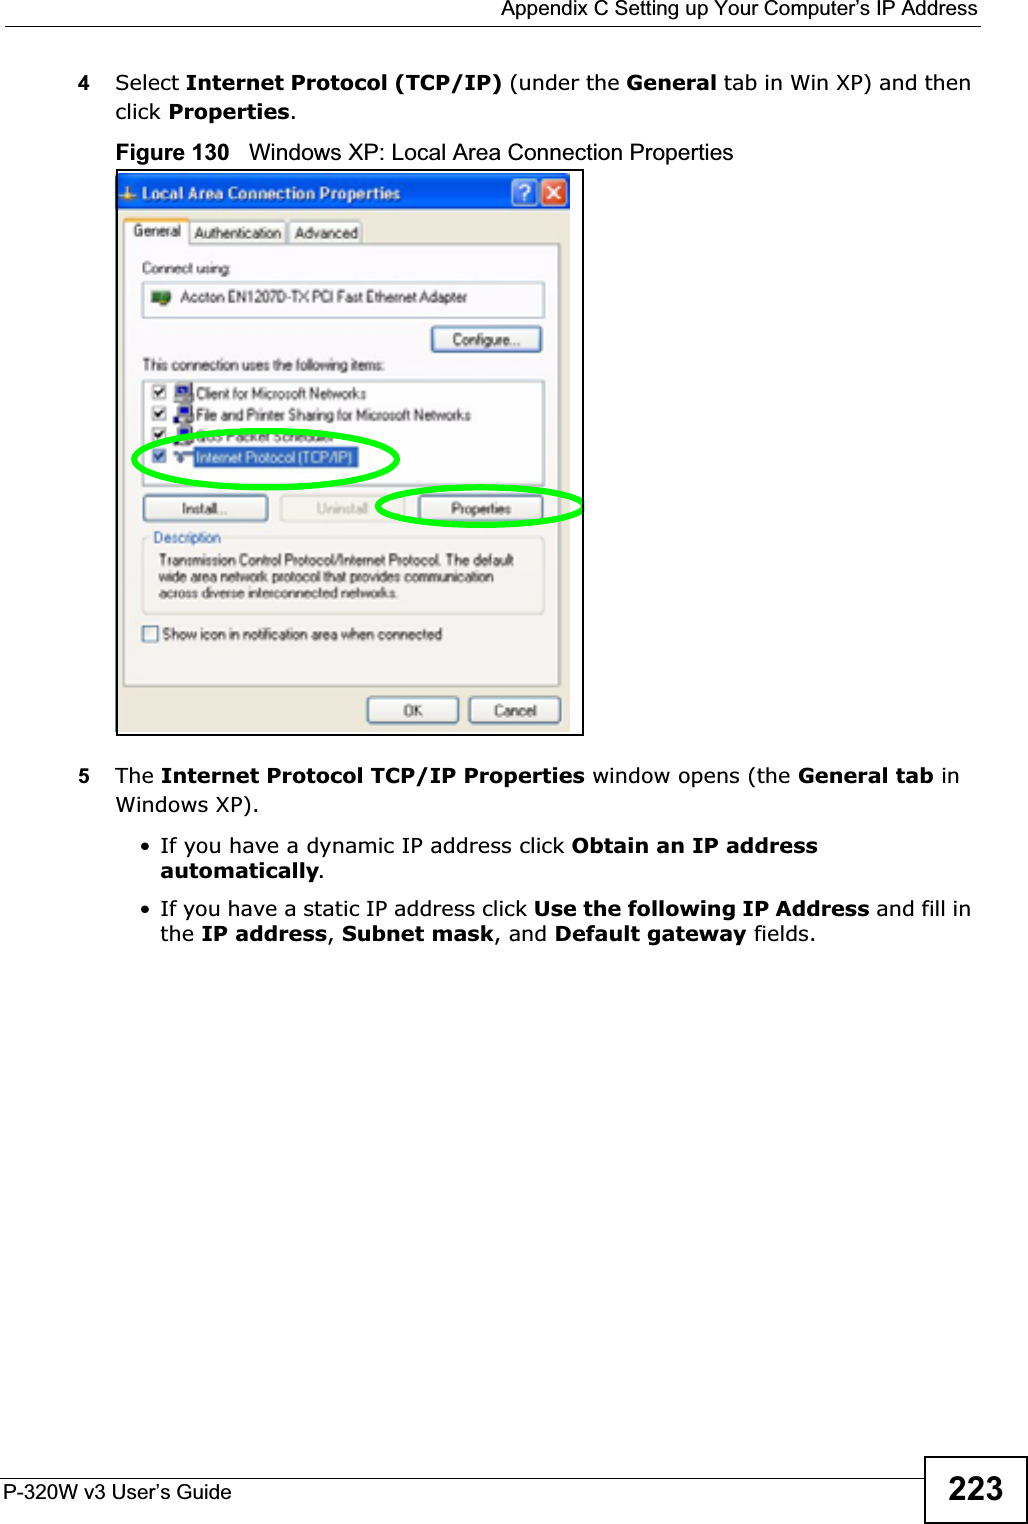  Appendix C Setting up Your Computer’s IP AddressP-320W v3 User’s Guide 2234Select Internet Protocol (TCP/IP) (under the General tab in Win XP) and then click Properties.Figure 130   Windows XP: Local Area Connection Properties5The Internet Protocol TCP/IP Properties window opens (the General tab in Windows XP).• If you have a dynamic IP address click Obtain an IP address automatically.• If you have a static IP address click Use the following IP Address and fill in the IP address,Subnet mask, and Default gateway fields. 